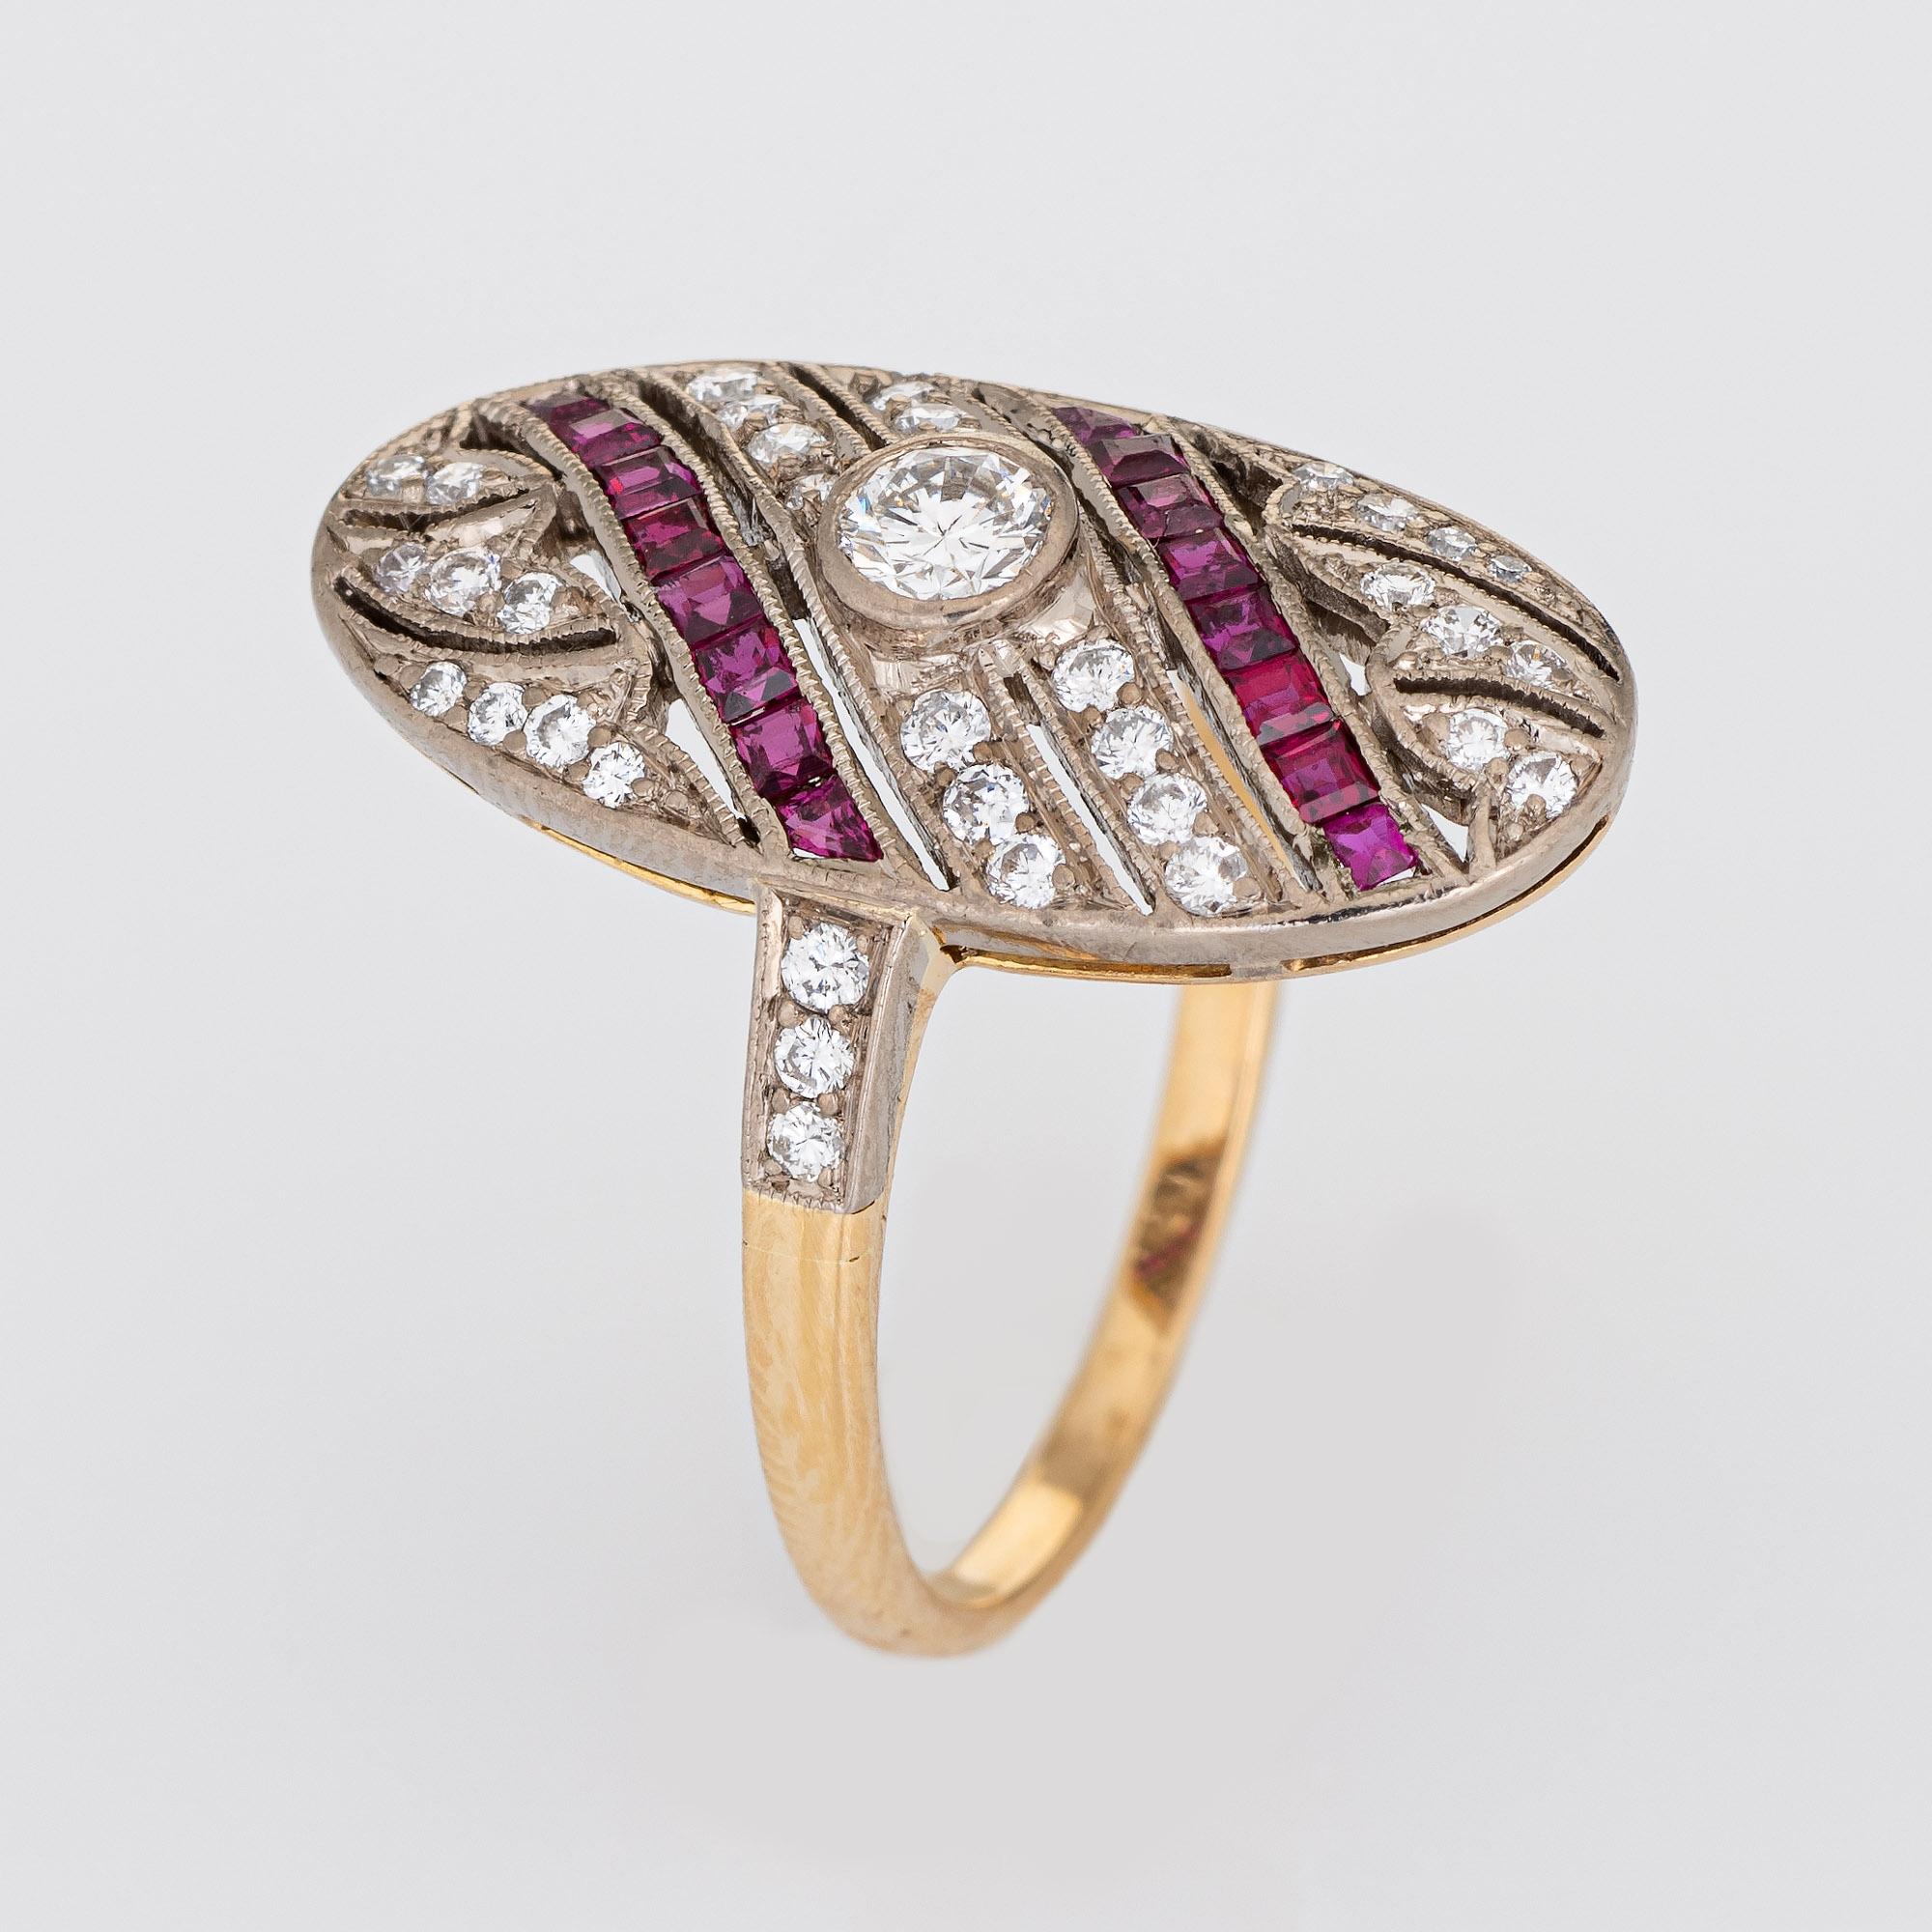 Stylish estate ruby & diamond ring crafted in 18 karat white & yellow gold. 

Round brilliant cut diamonds total an estimated 0.37 carats (estimated at H-I color and VS2-SI1 clarity). Box cut rubies total an estimated 0.30 carats. The rubies are in